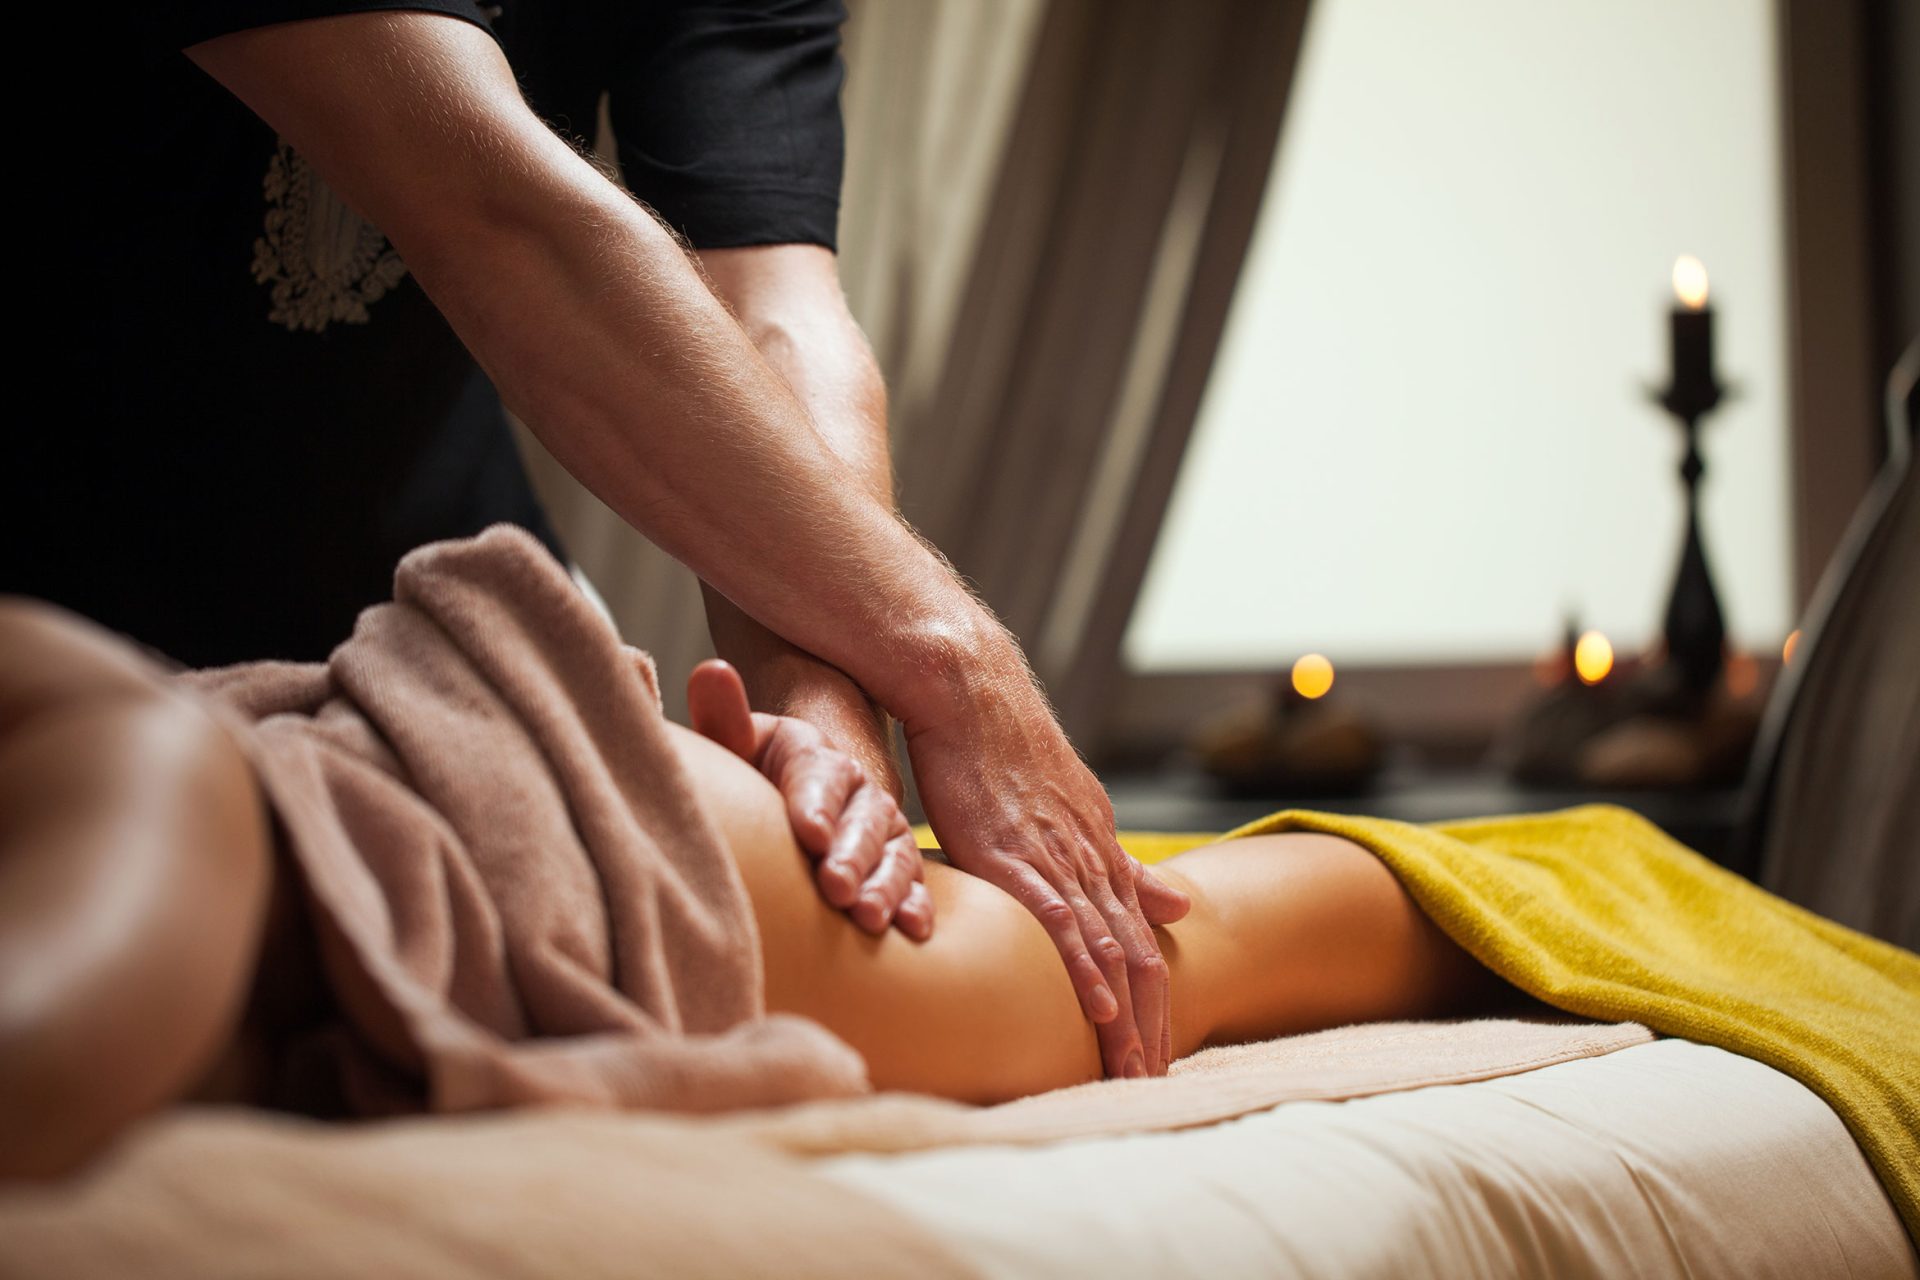 How to ask someone for a massage?